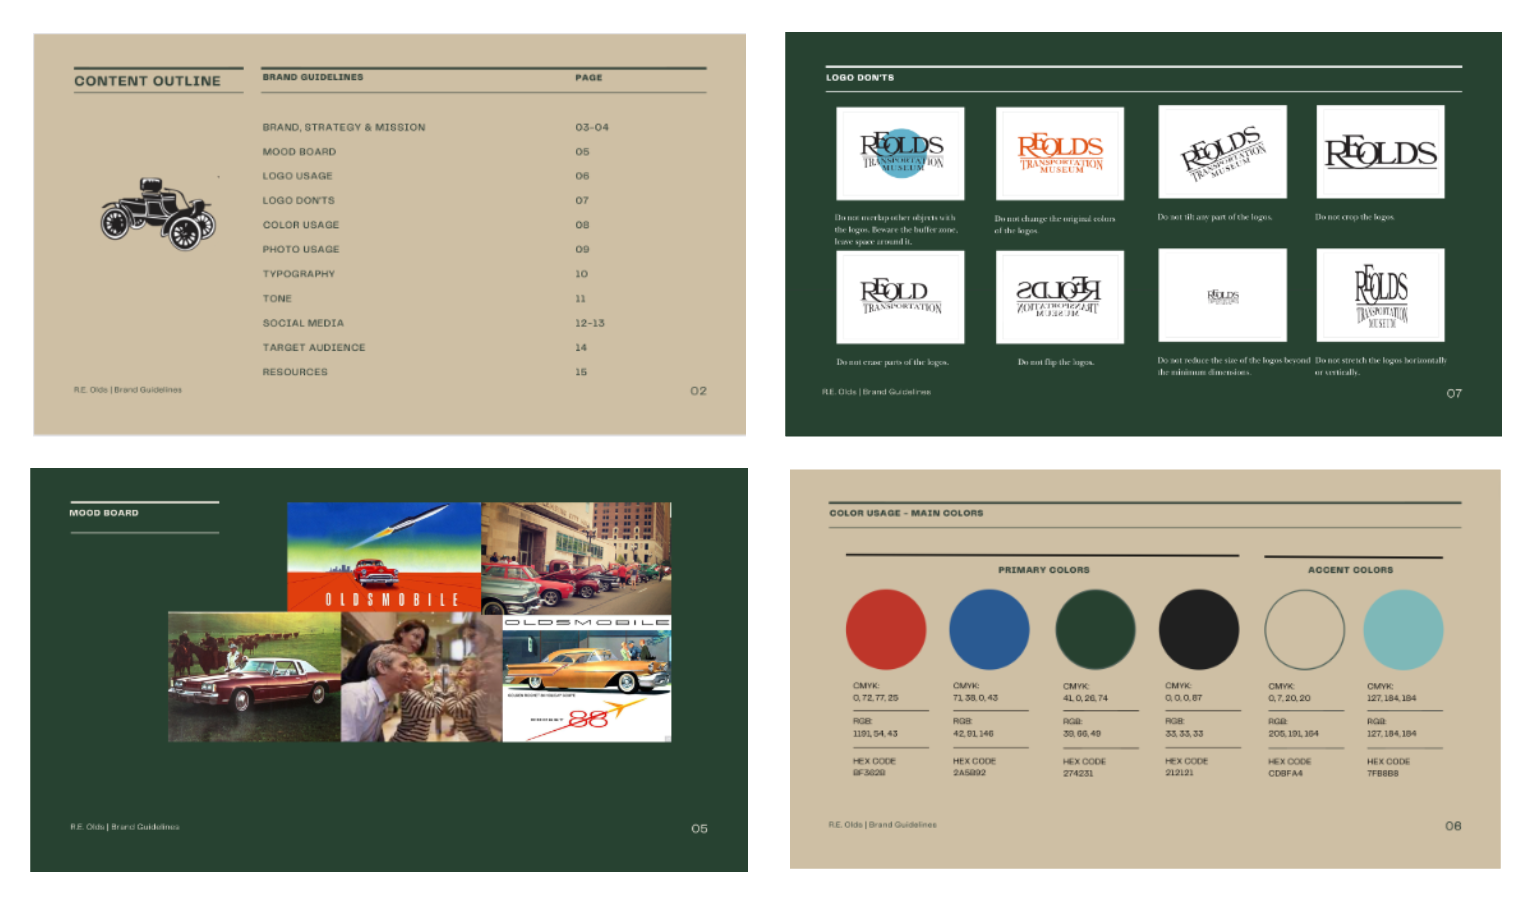 Preview of four slides from the brand guide, including a table of contents, logo don'ts, mood board, and main colors.